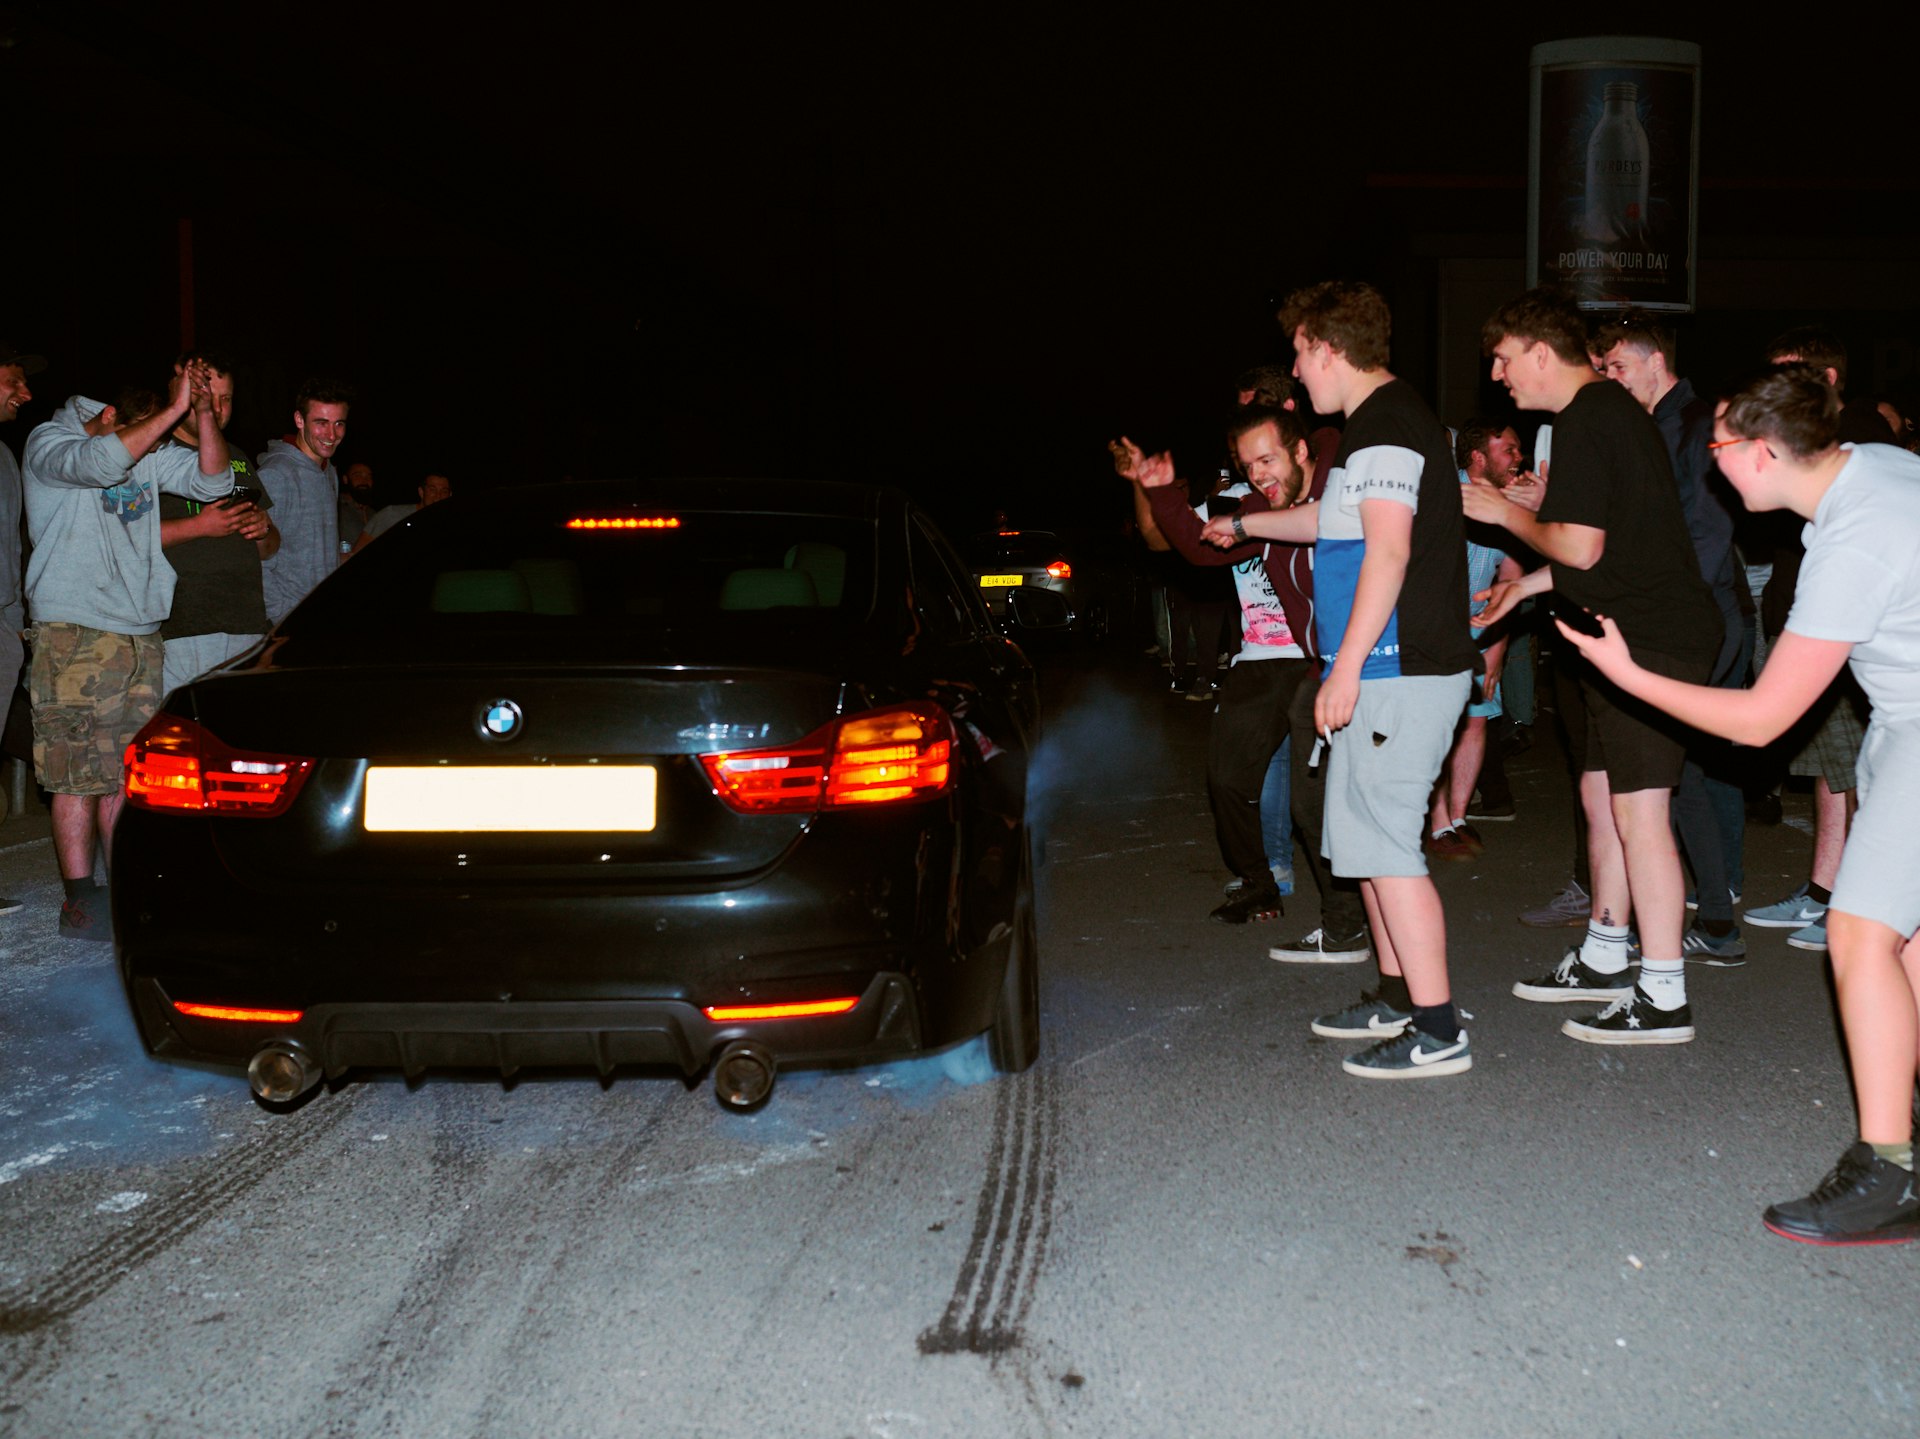 Photos showing the chaos and camaraderie of UK car meets